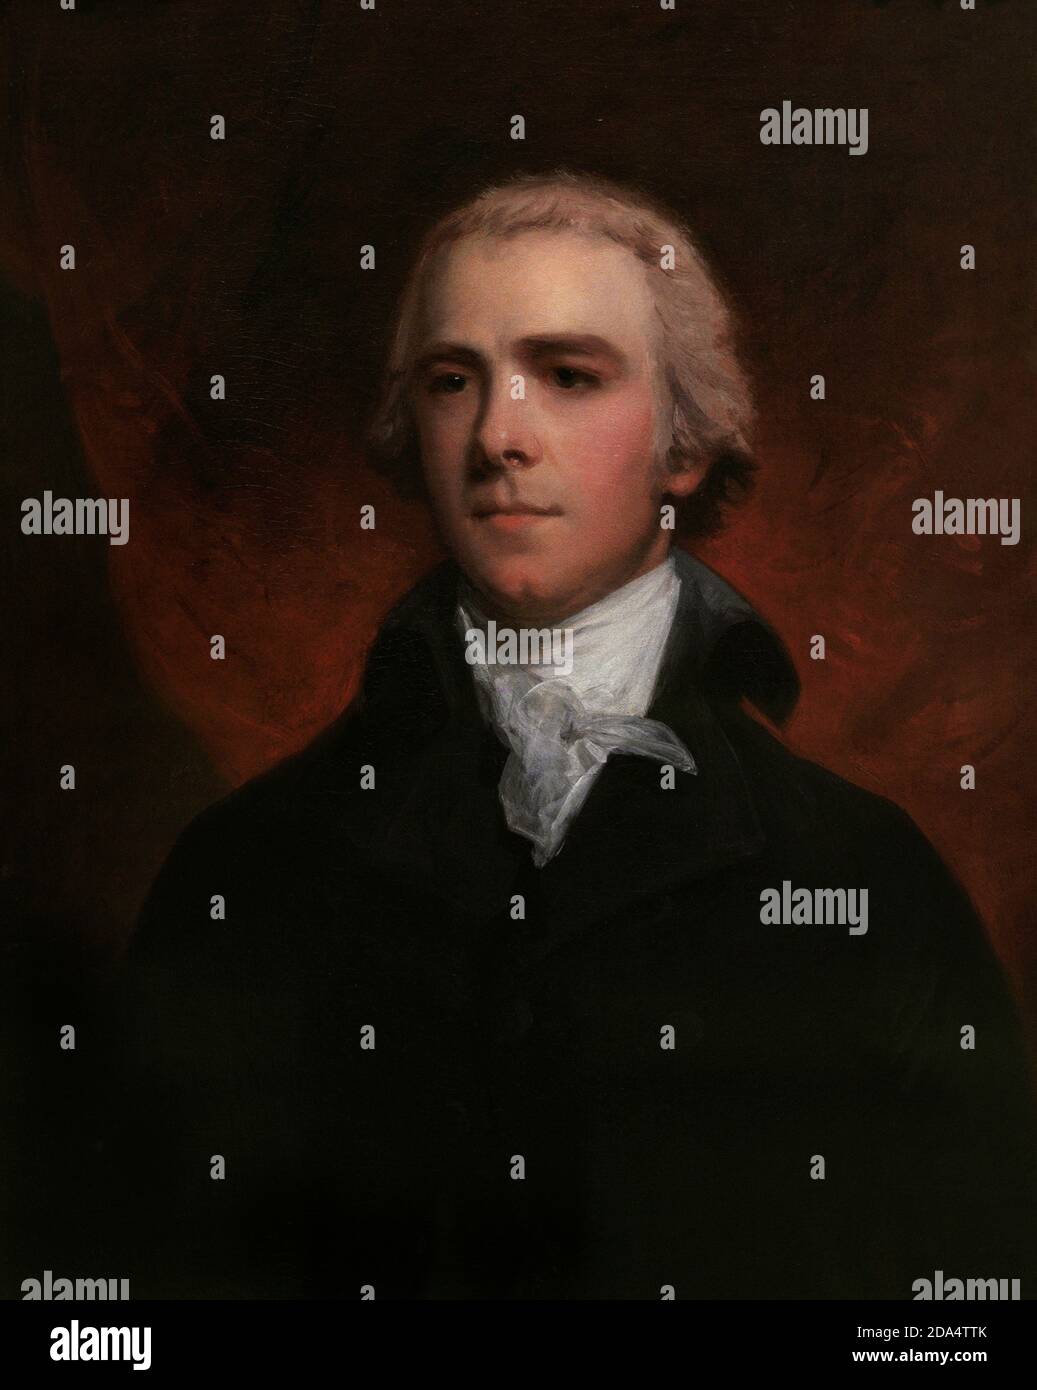 William Wyndham Grenville (1759-1834). 1st Baron Grenville. British politician. Pittite Tory who served as Speaker of the House of Commons in 1879 and Foreign Secretary (1791-1801). Prime Minister of the United Kingdom from 1806 to 1807. Portrait by John Hoppner (1758-1810). Oil on canvas (76,8 x 63,5 cm), c. 1800. National Portrait Gallery. London, England, United Kingdom. Stock Photo